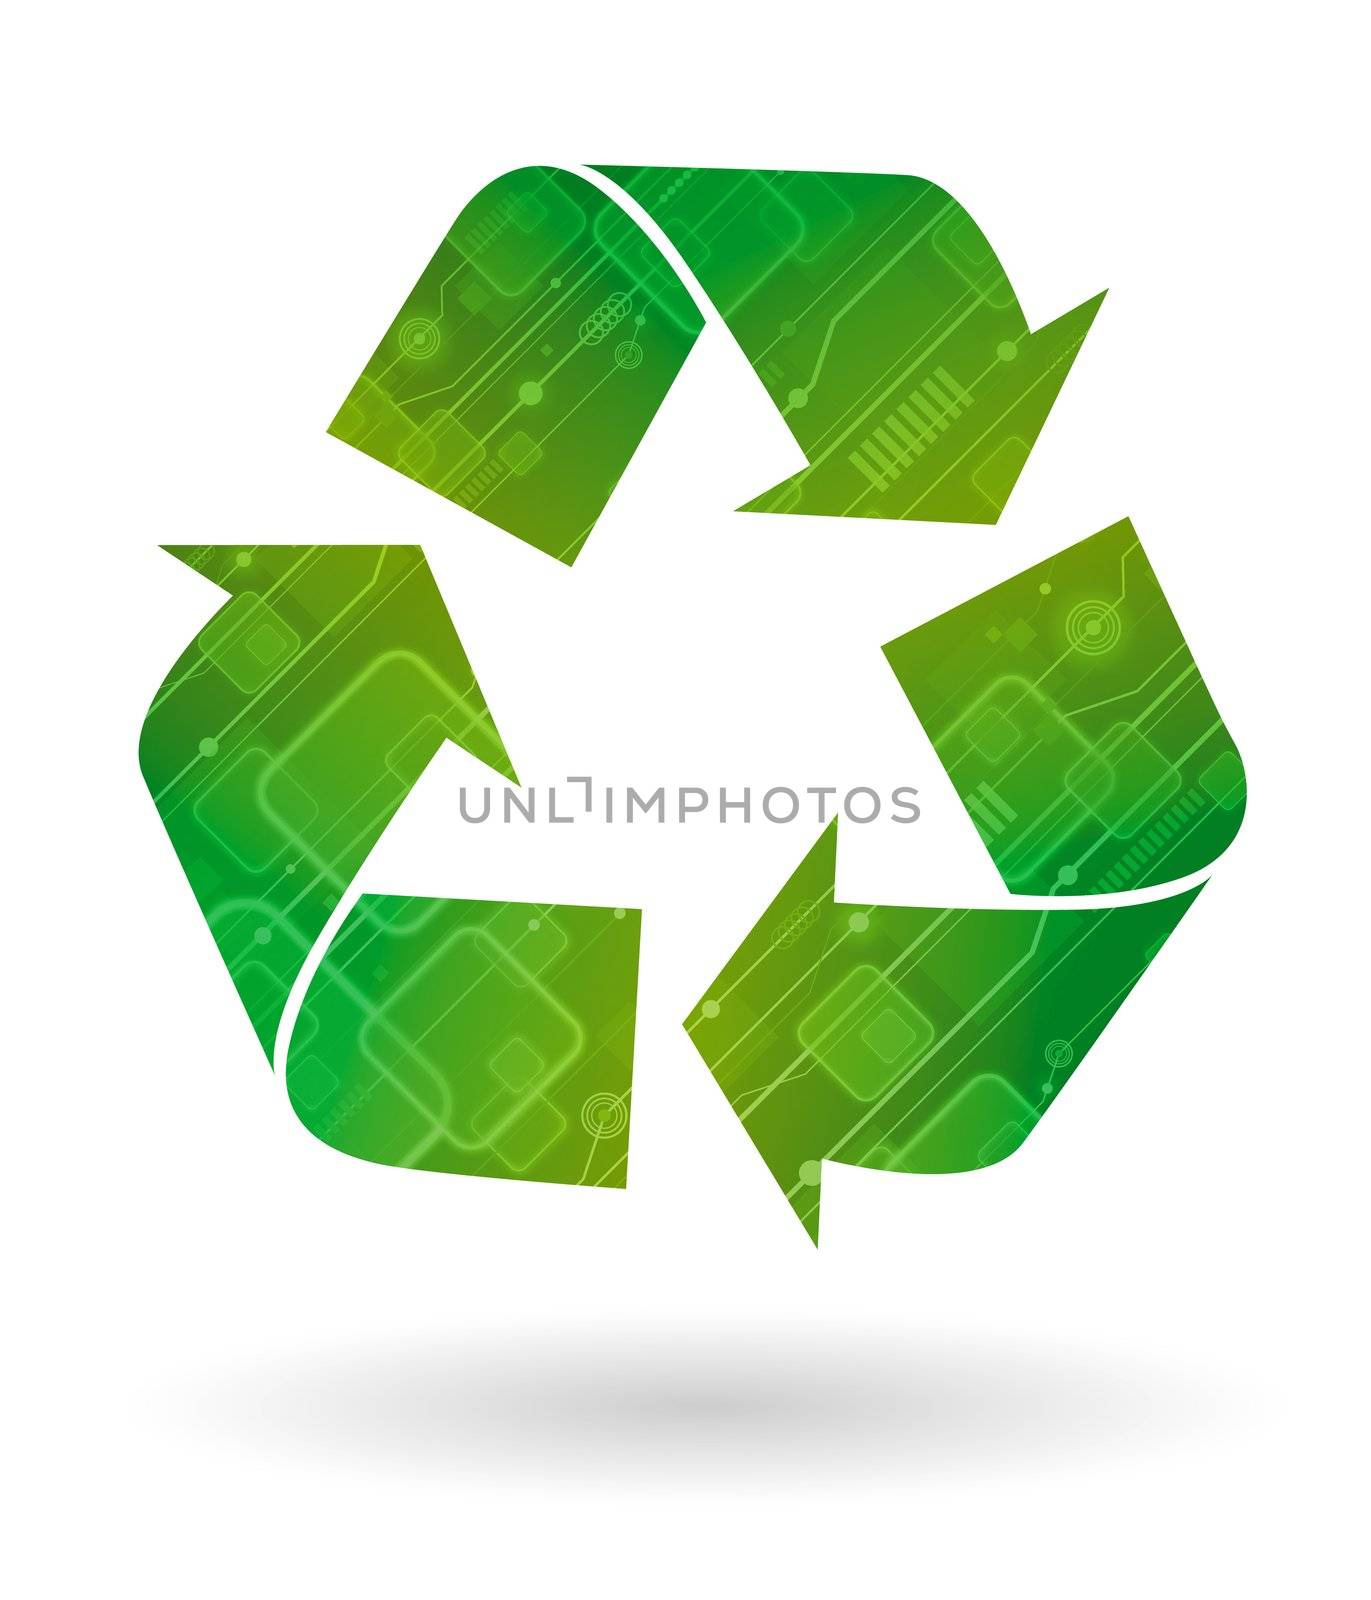 Recycle design on white background